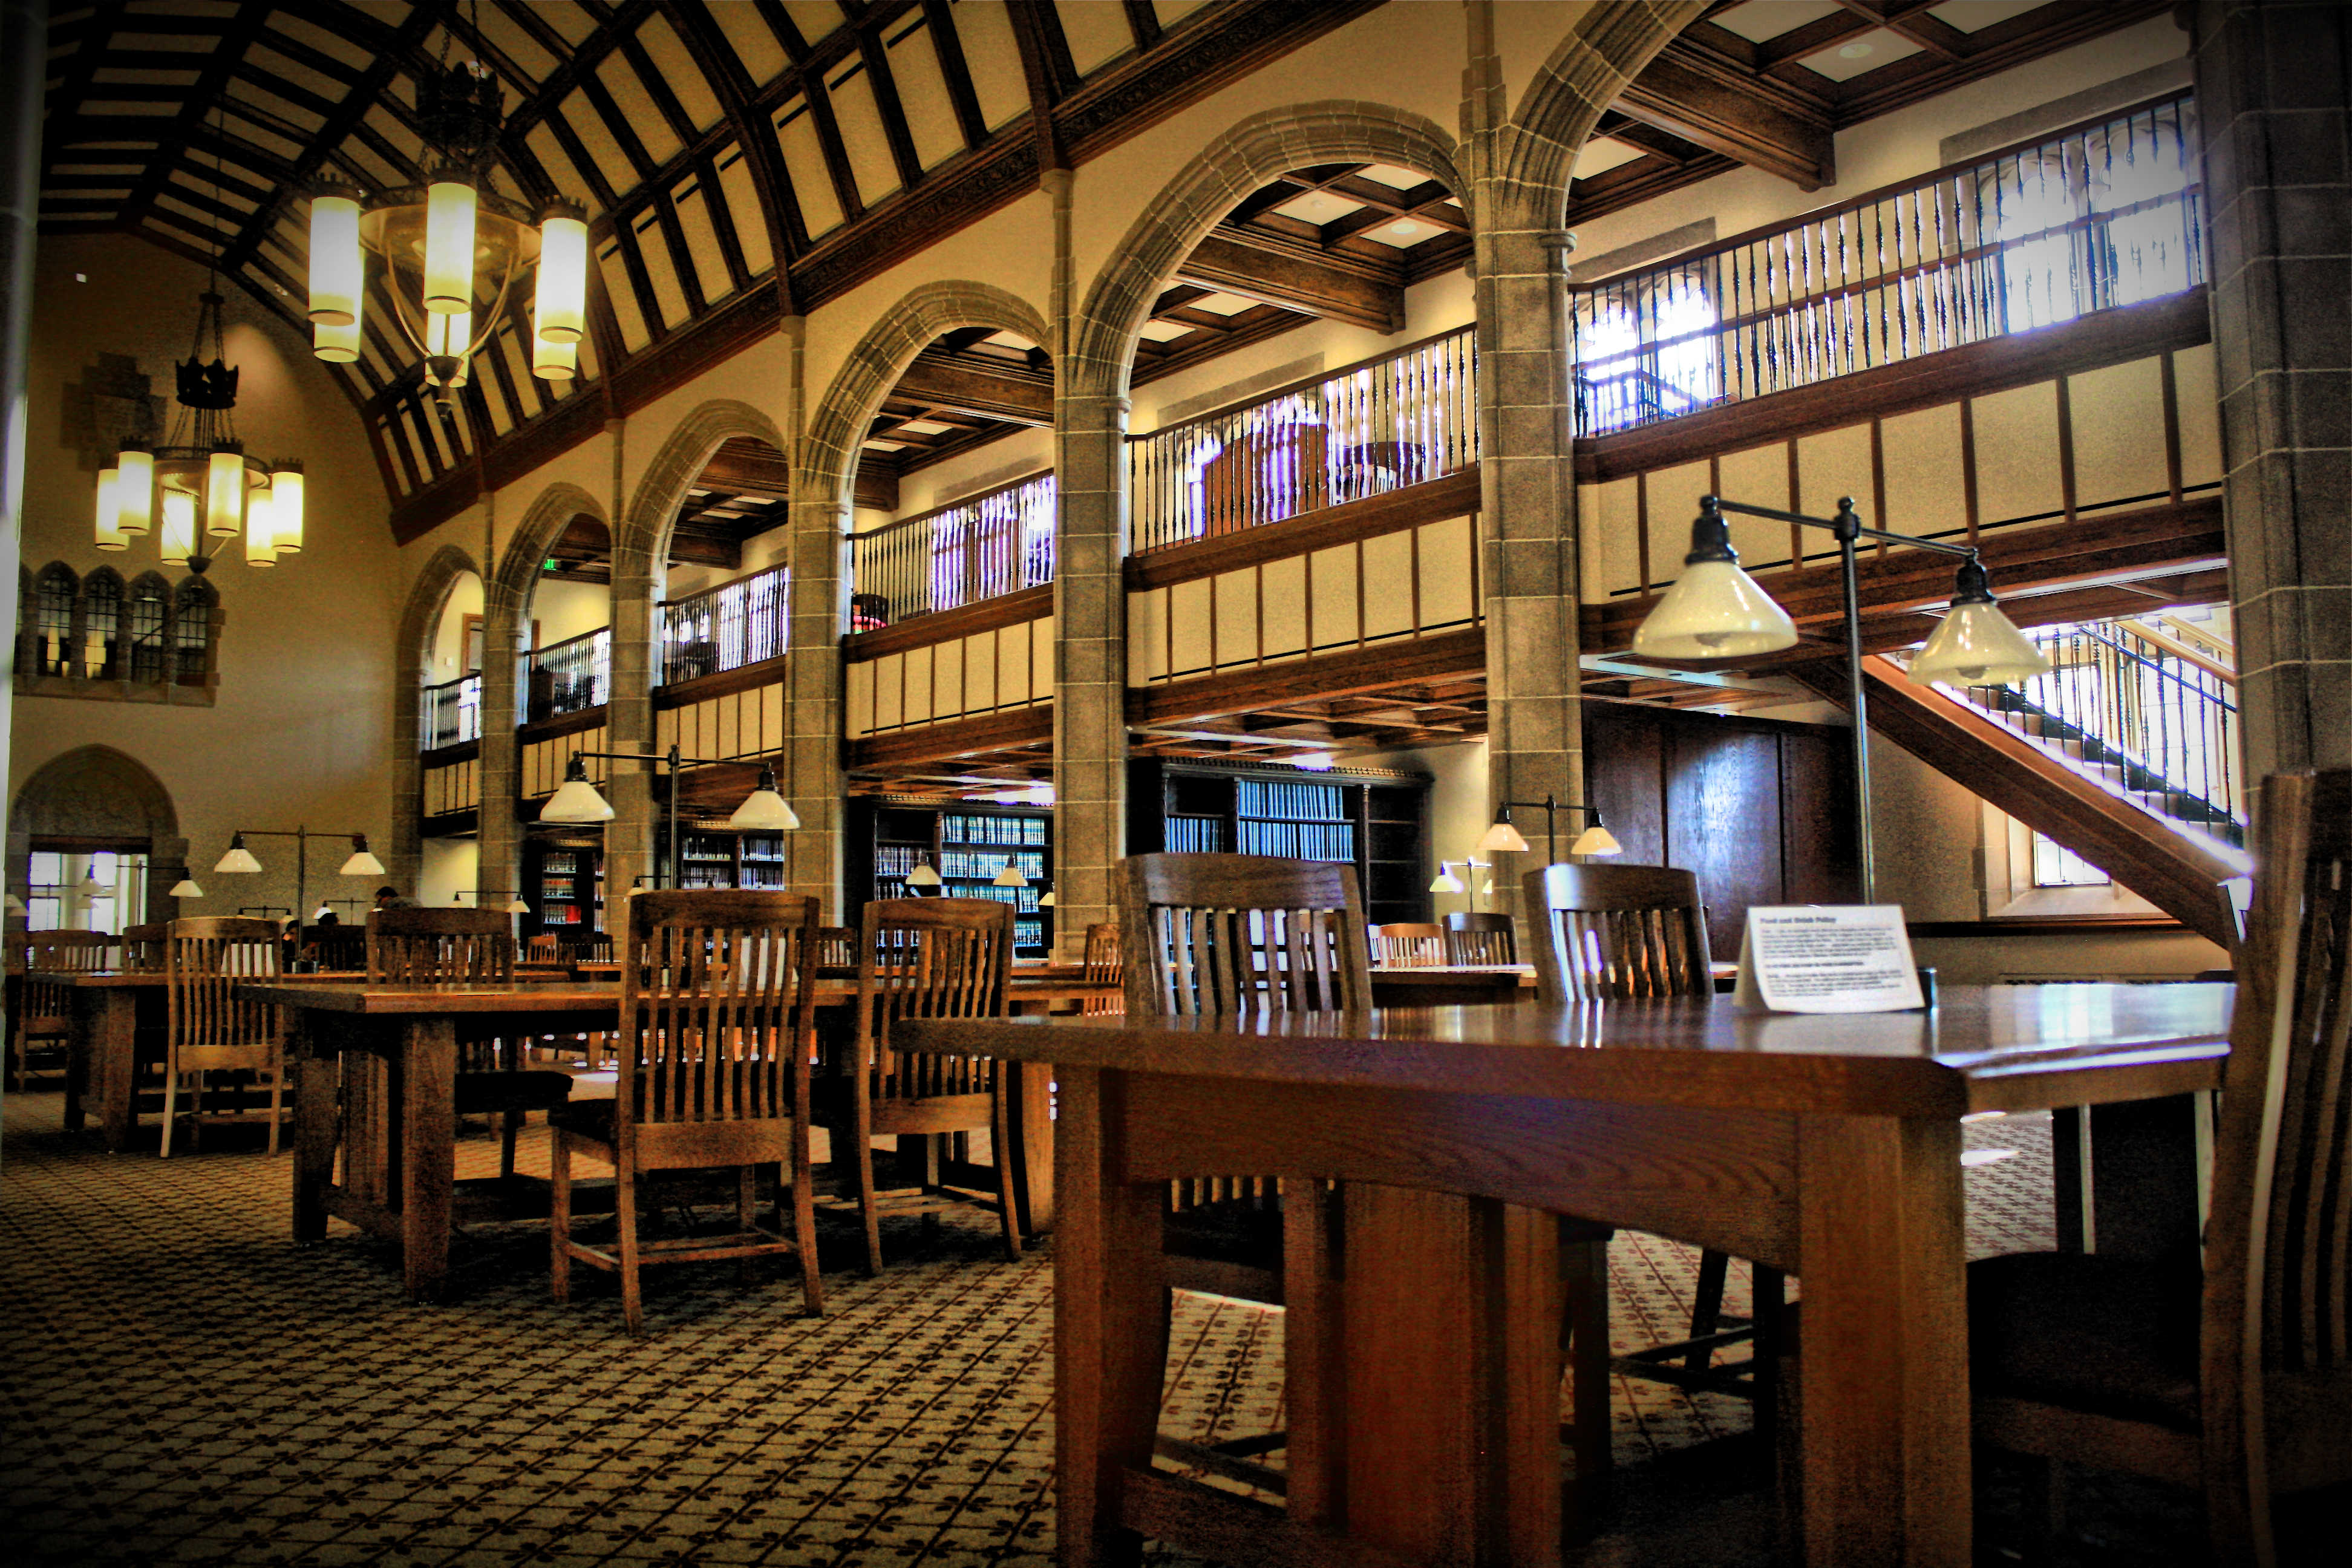 Notre Dame Law Library - Image Taken by Michael Fernandes